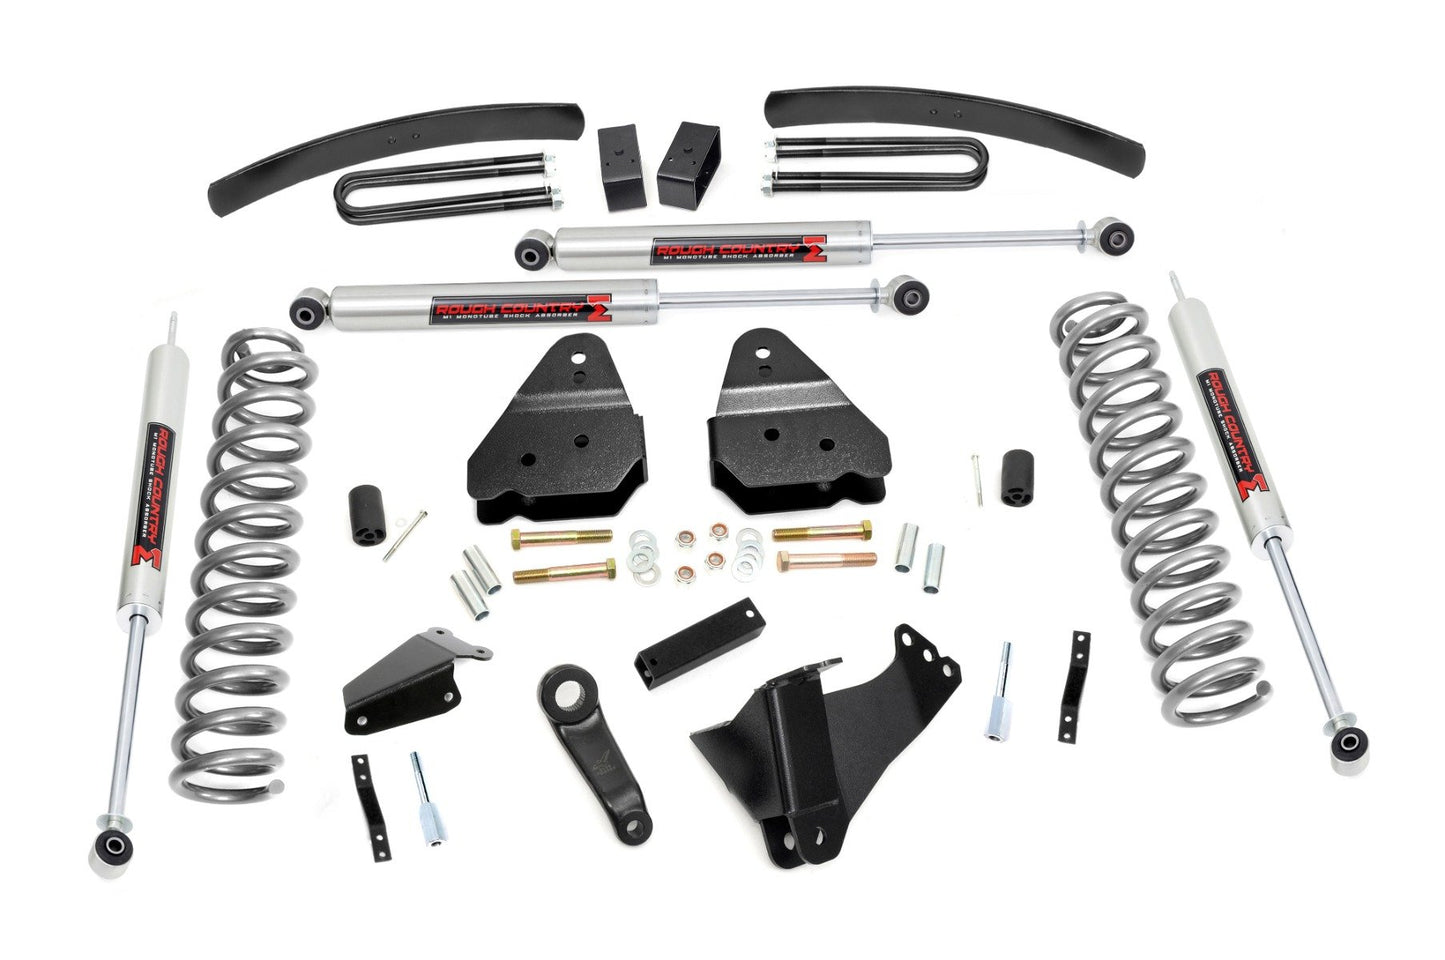 Rough Country (59340) 6 Inch Lift Kit | Diesel | M1 | Ford F-250/F-350 Super Duty 4WD (2005-2007)